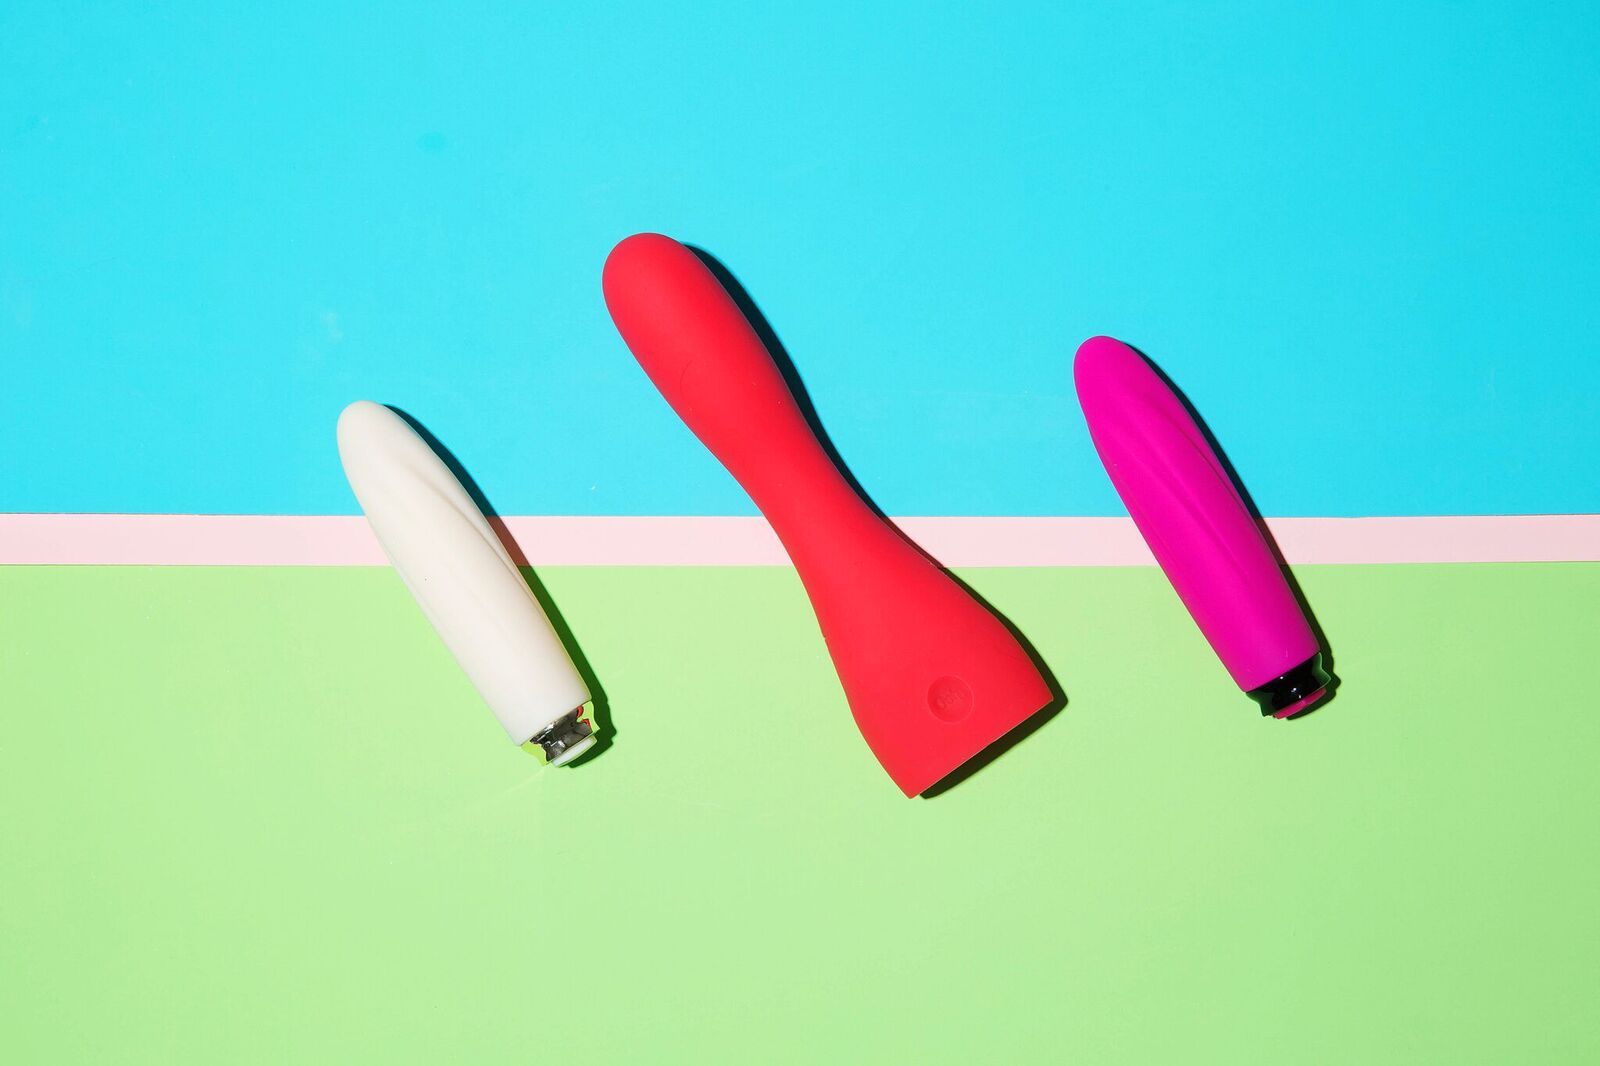 home made sex toys gone bad